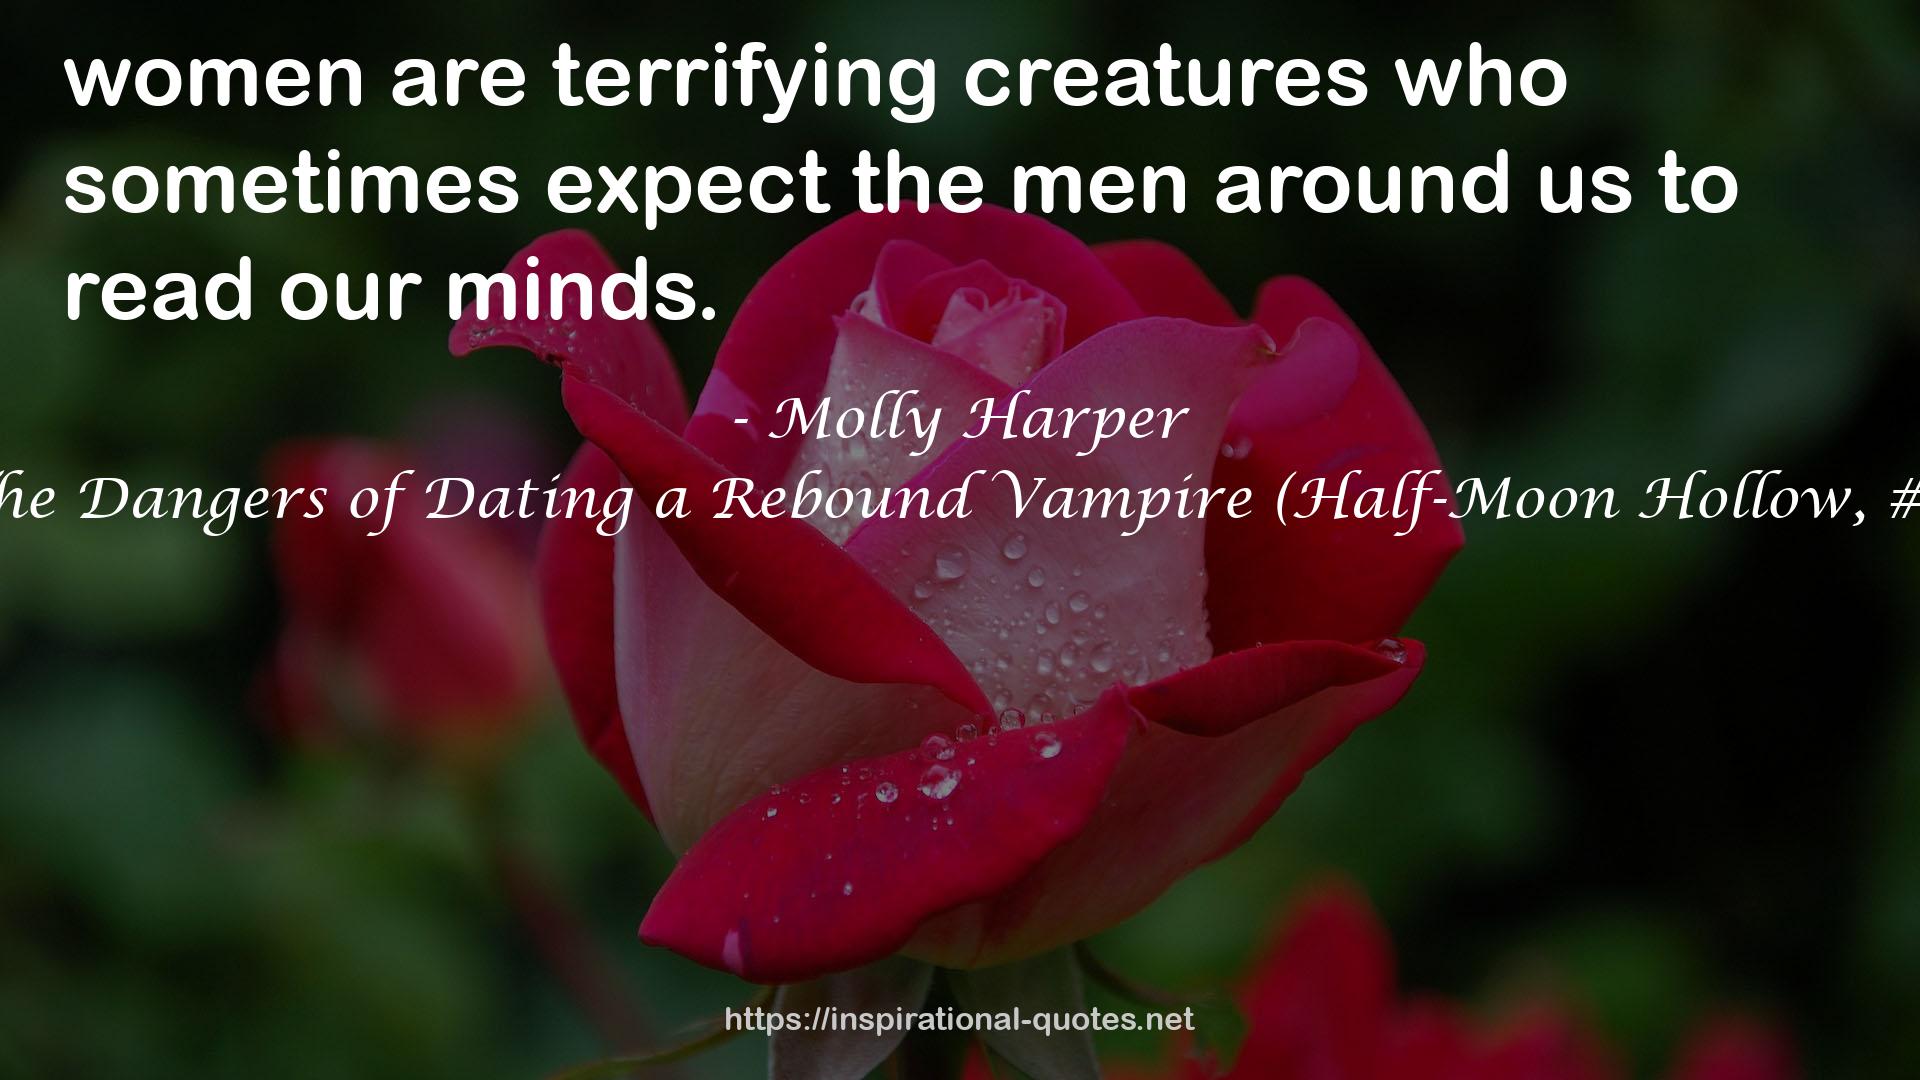 The Dangers of Dating a Rebound Vampire (Half-Moon Hollow, #3) QUOTES